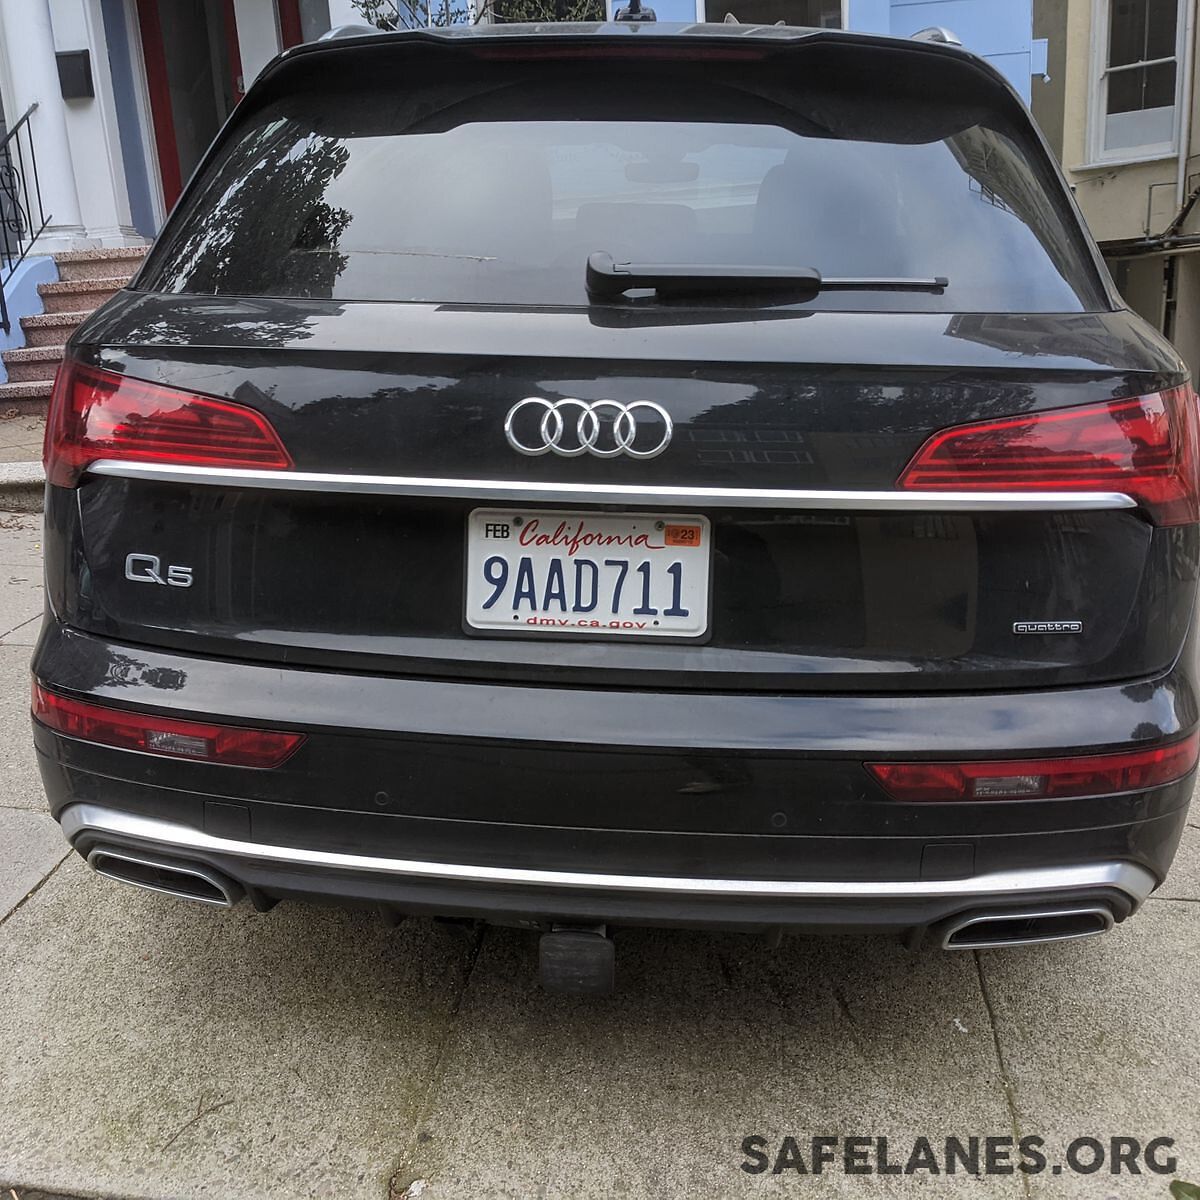 Photo of car in the street with license plate 9AAD711 in California